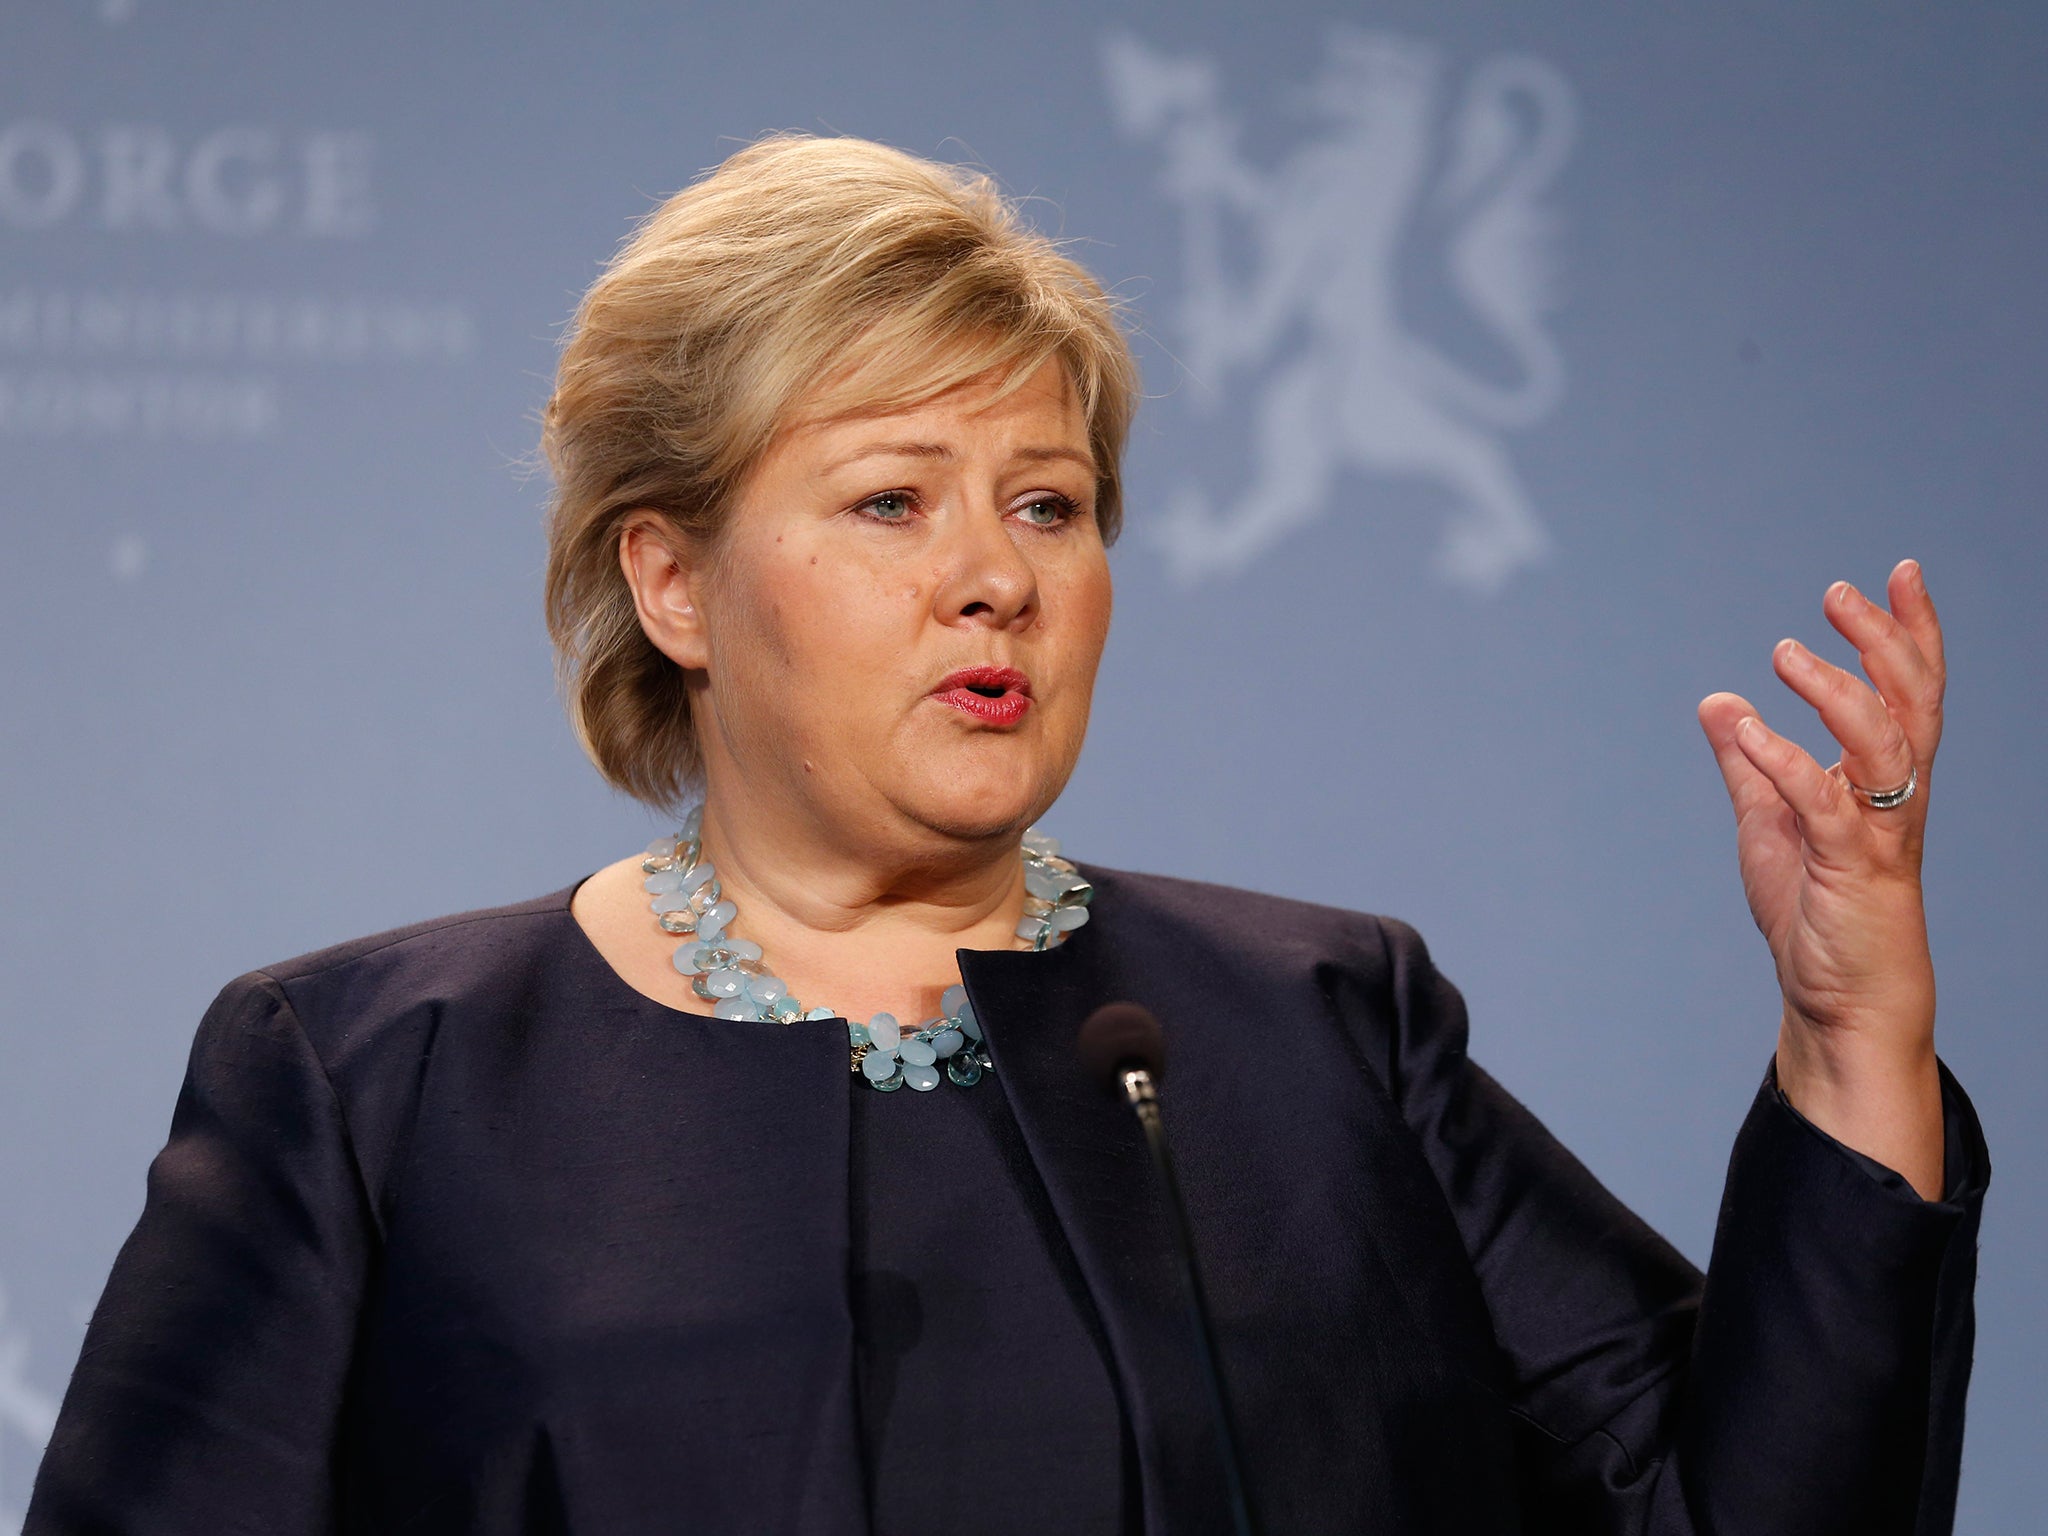 Erna Solberg previously told reporters she wanted to 'hatch eggs' while in Bratislava, in order to catch the rarest Pokemon